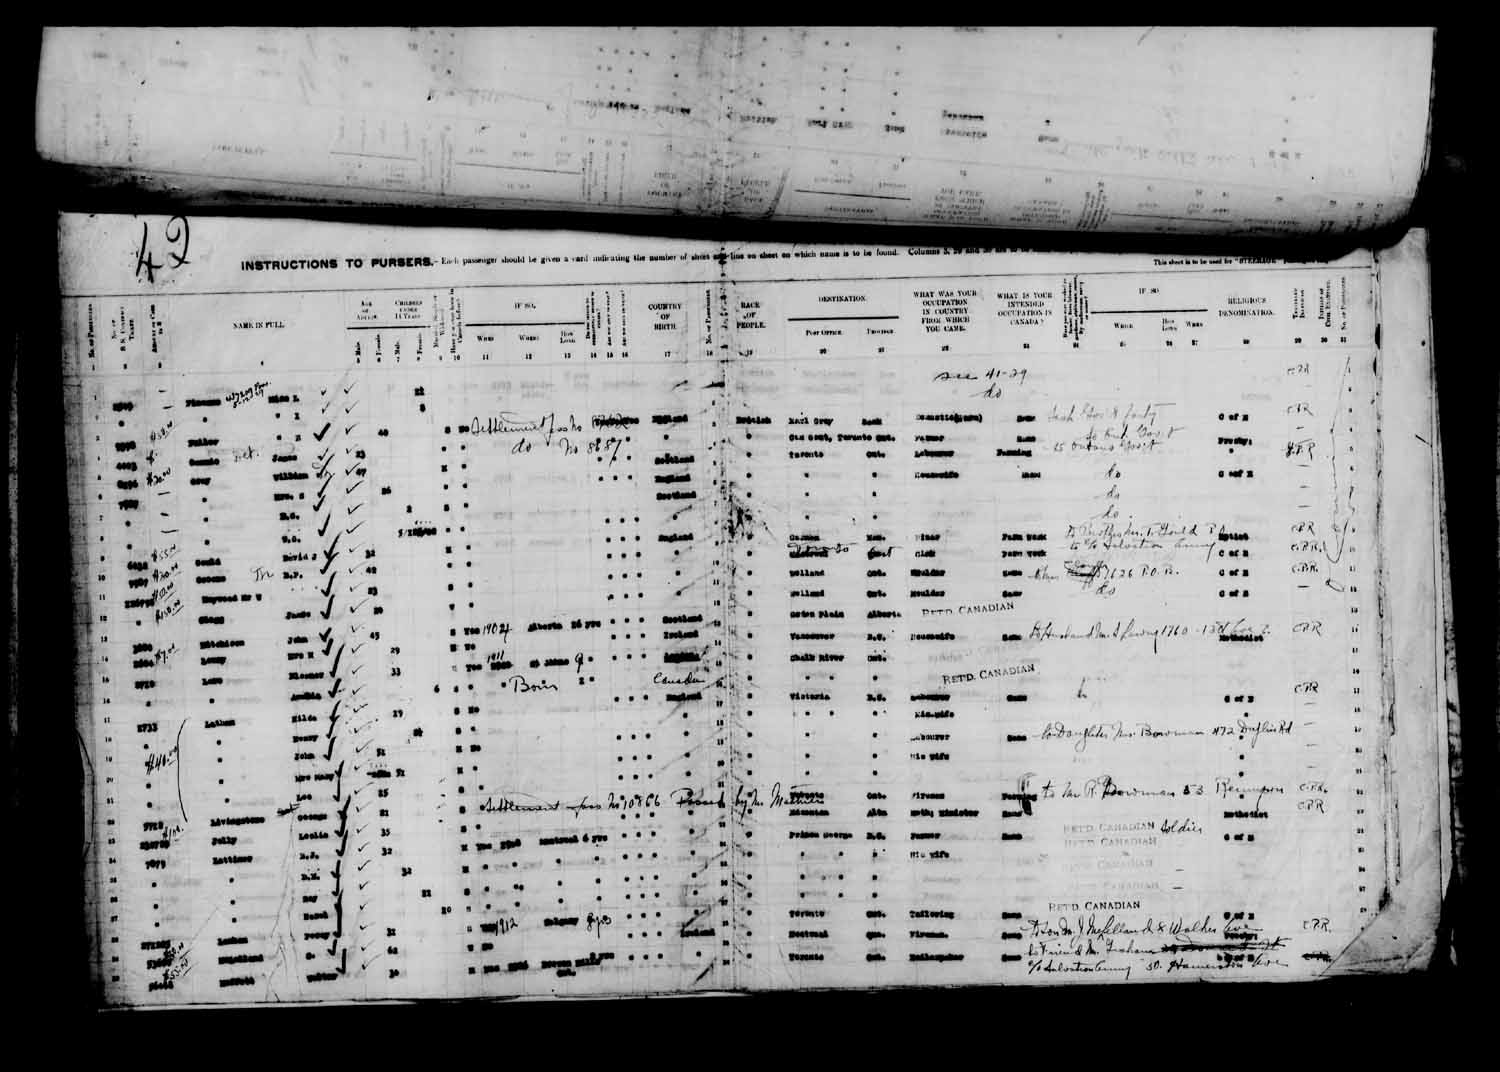 Digitized page of Passenger Lists for Image No.: e003610669